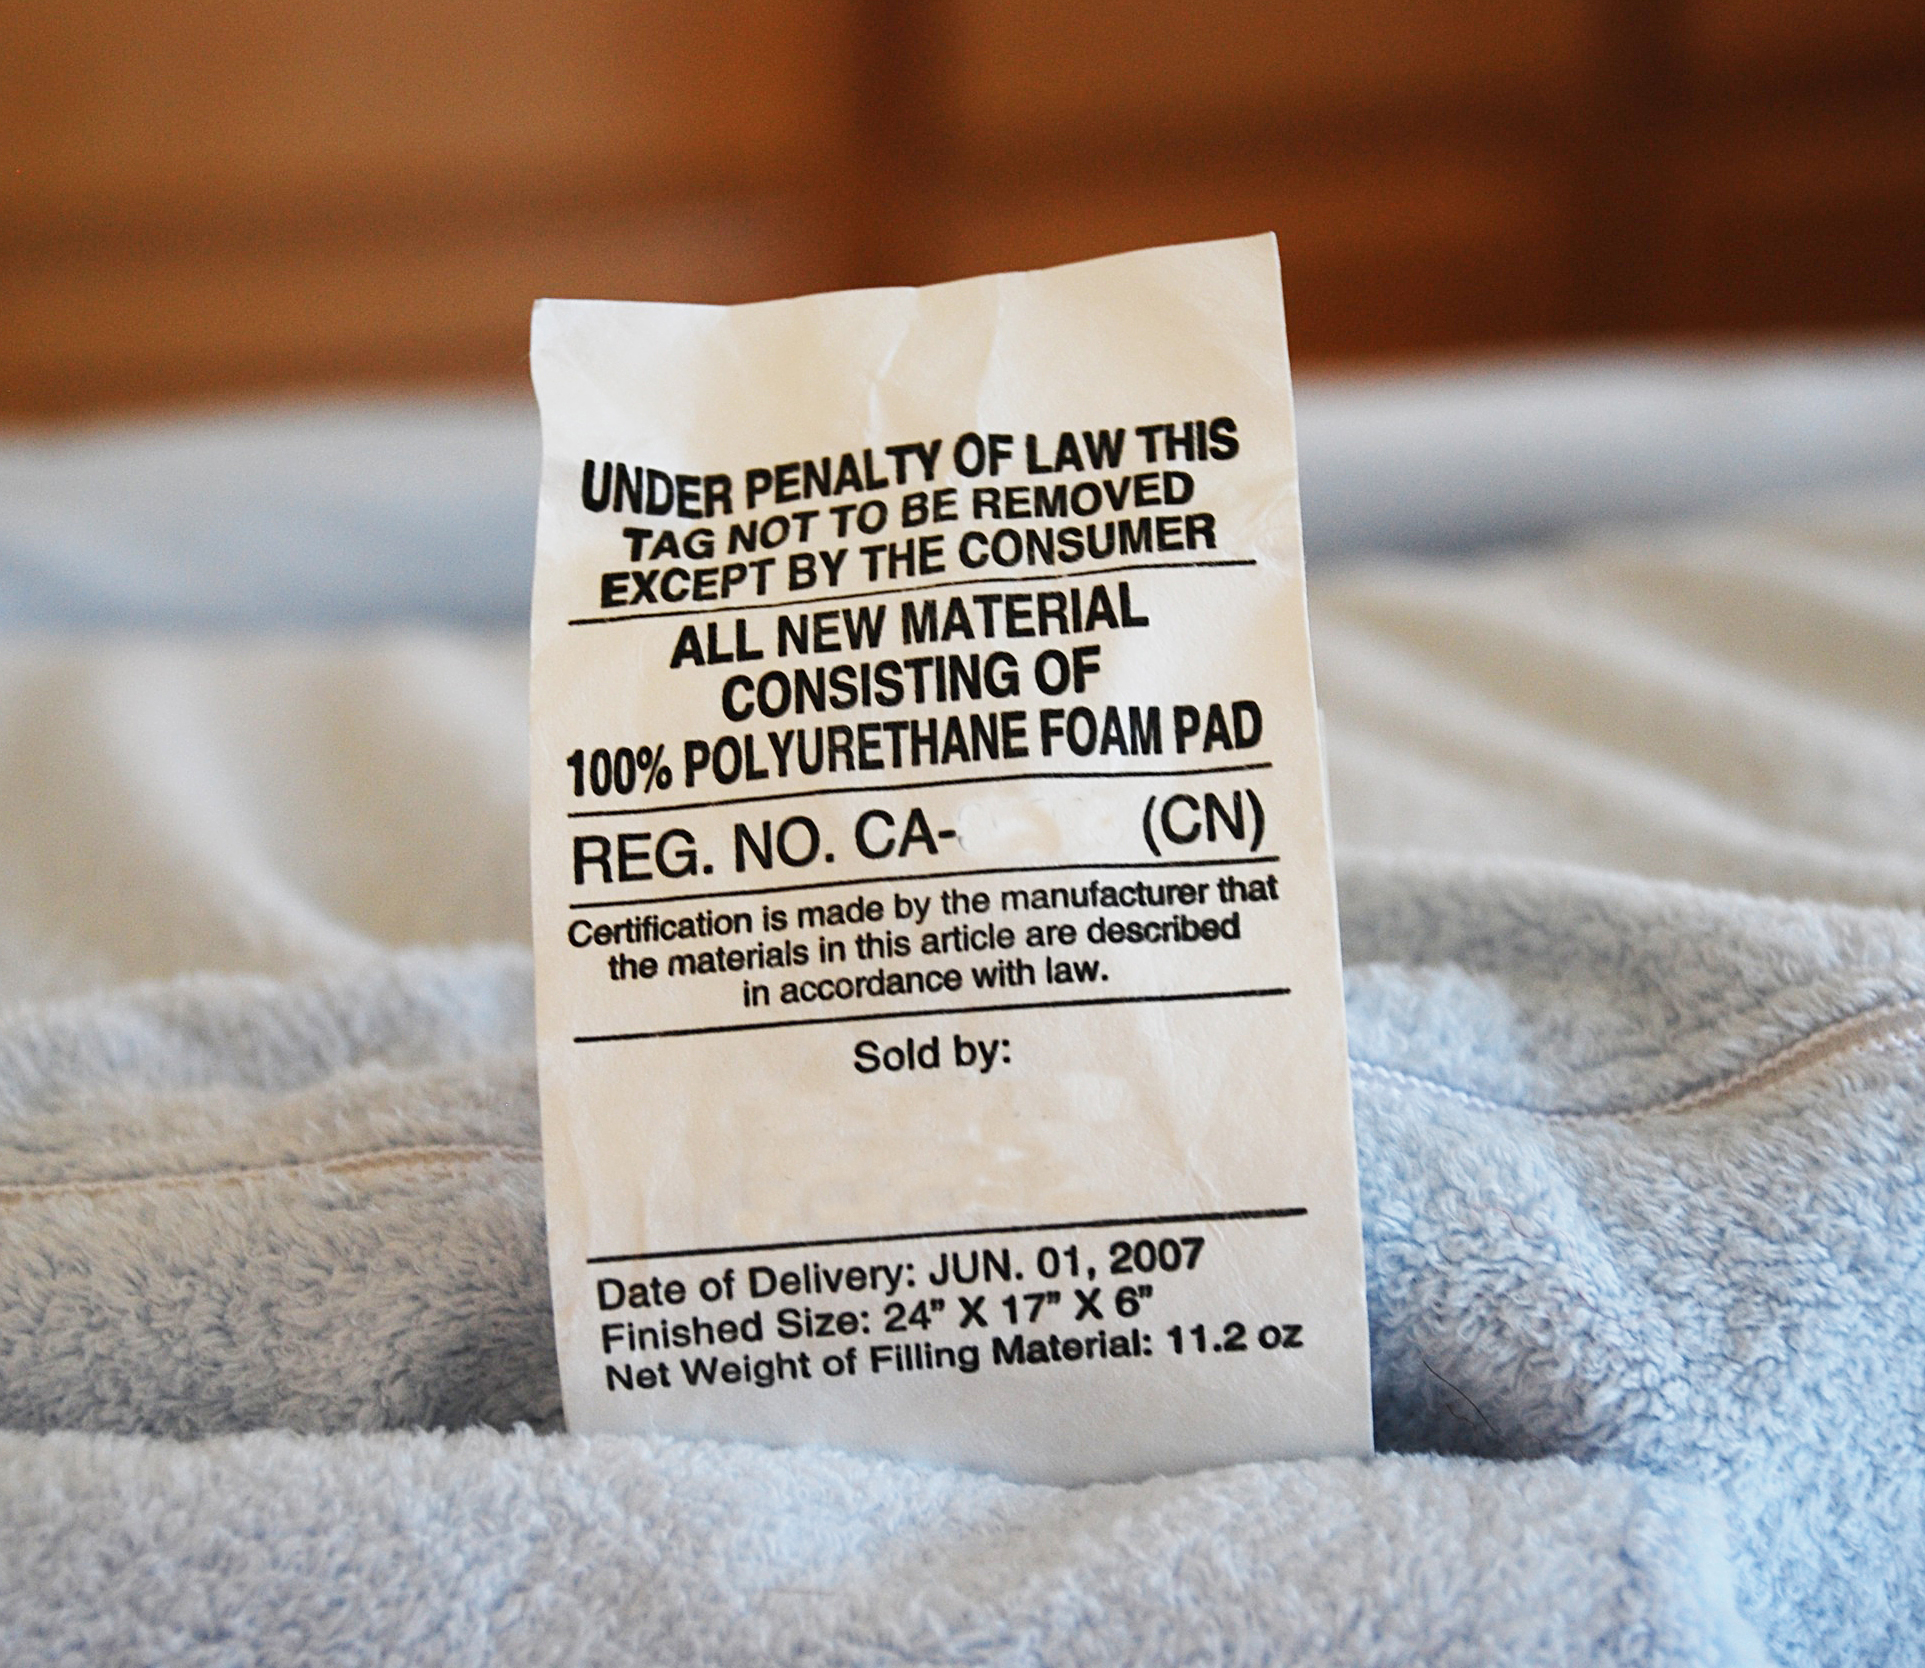 dumb laws and victimless crimes - mattress tag law - Under Penalty Of Law This Tag Not To Be Removed Except By The Consumer All New Material Consisting Of 100% Polyurethane Foam Pad Reg. No. Ca Cn Certification is made by the manufacturer that the materia